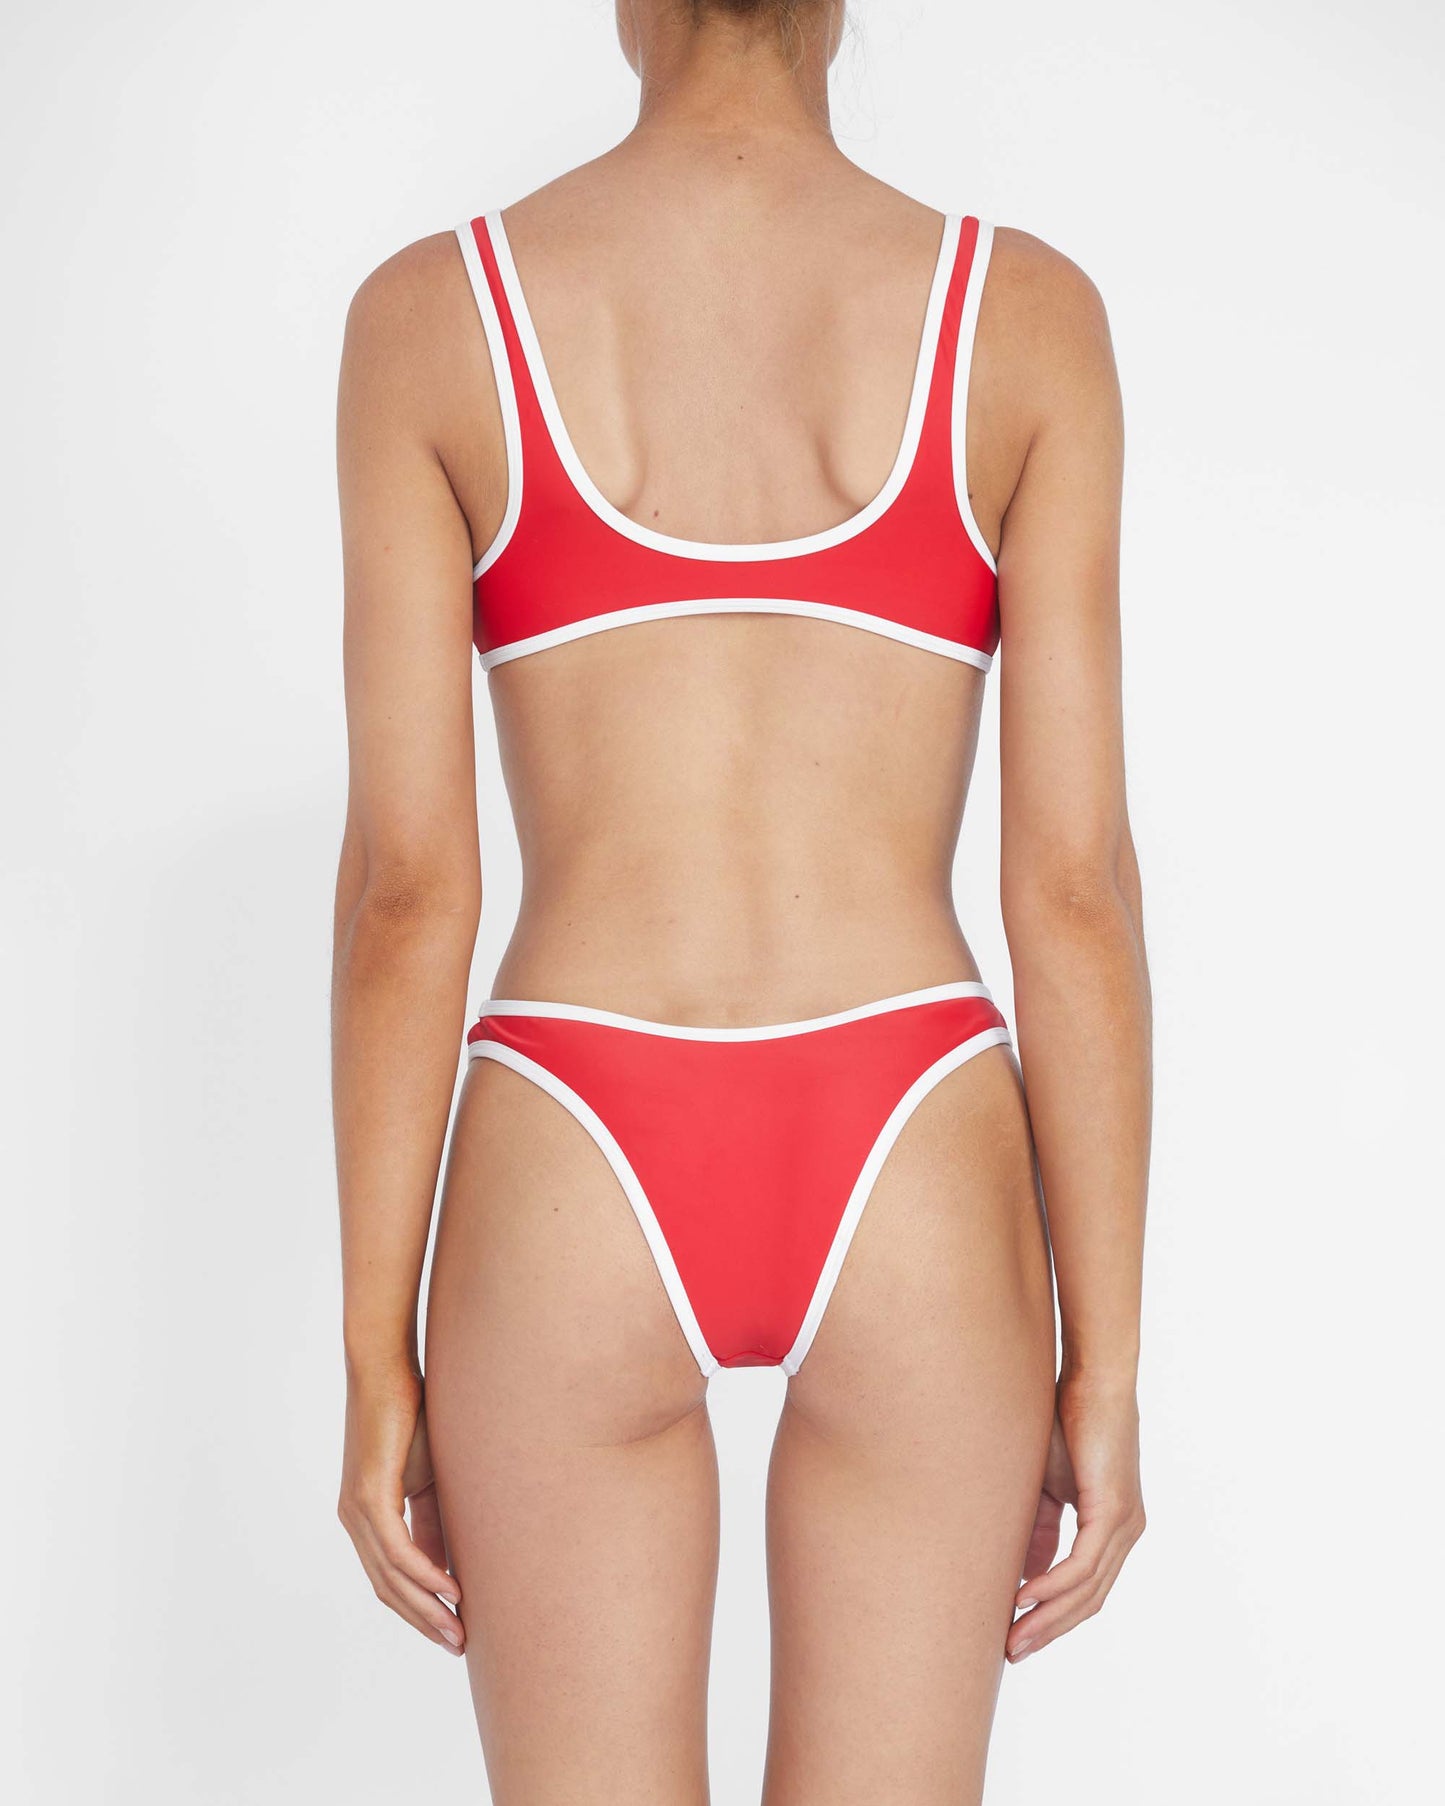 It's Now Cool Swimwear - 90s Duo Crop - Red & White Contrast